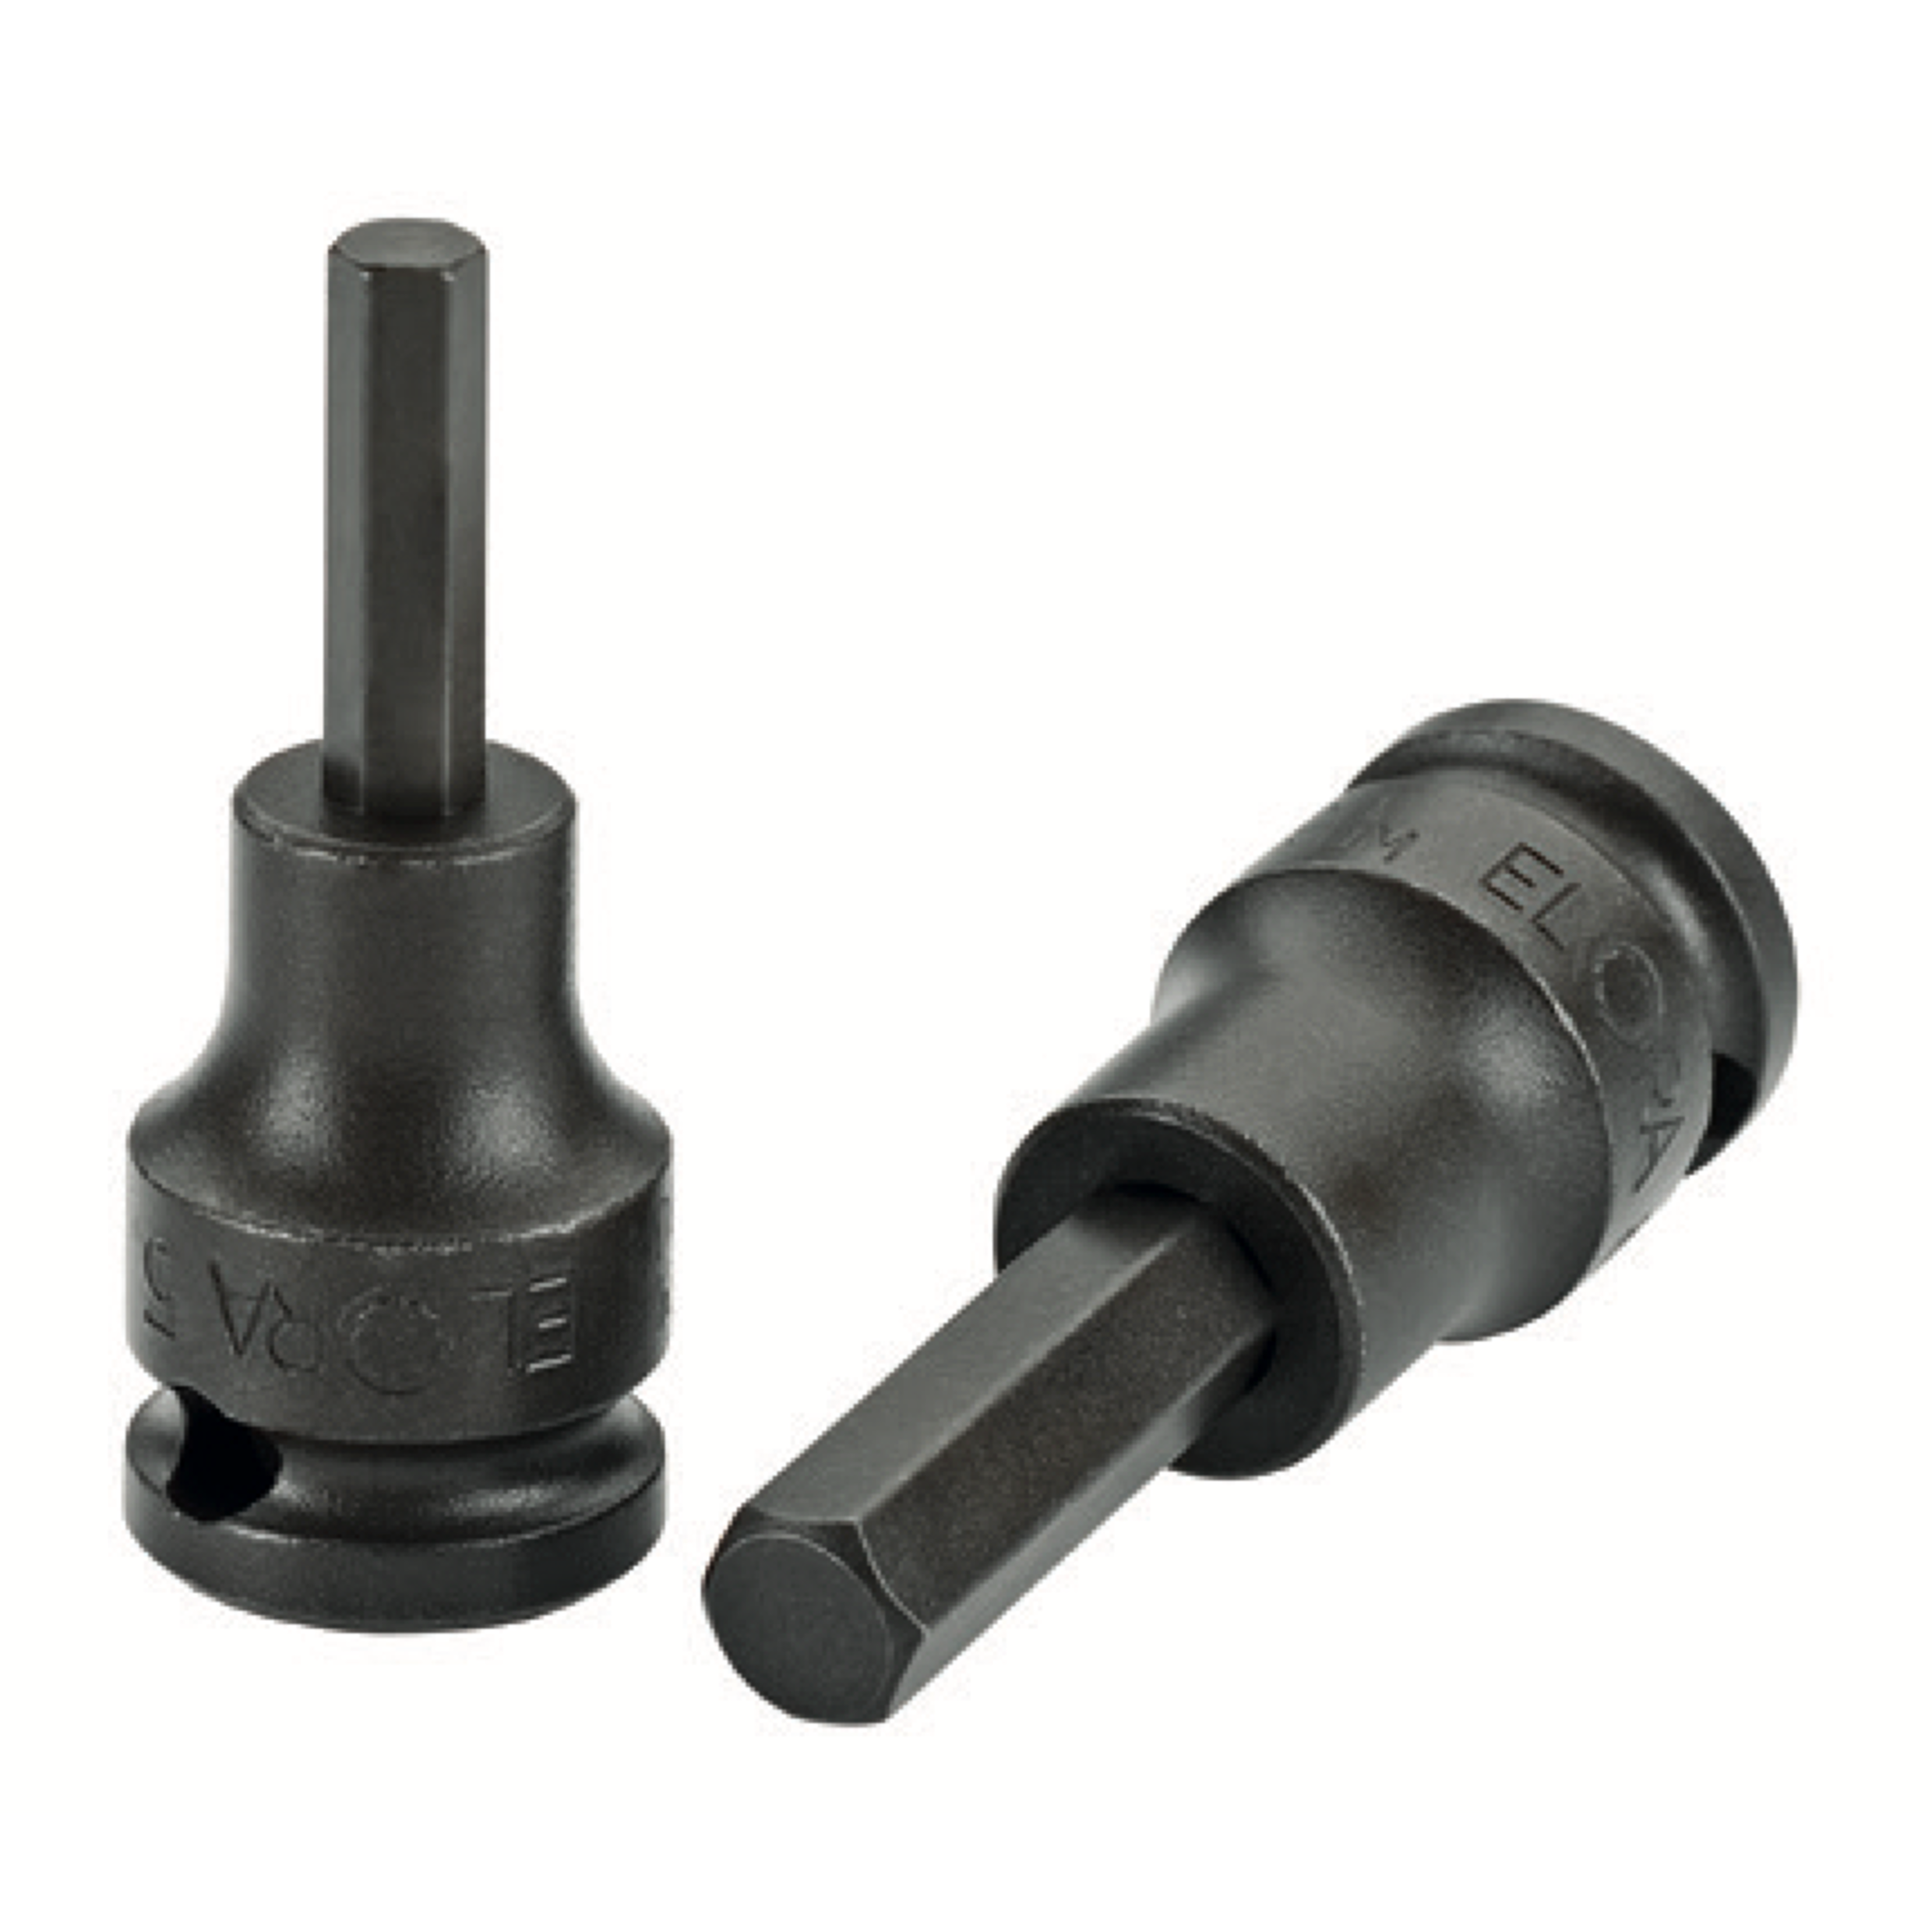 ELORA 790INA Impact Screwdriver Socket 1/2" Inches (ELORA Tools) - Premium Impact Screwdriver Socket from ELORA - Shop now at Yew Aik.